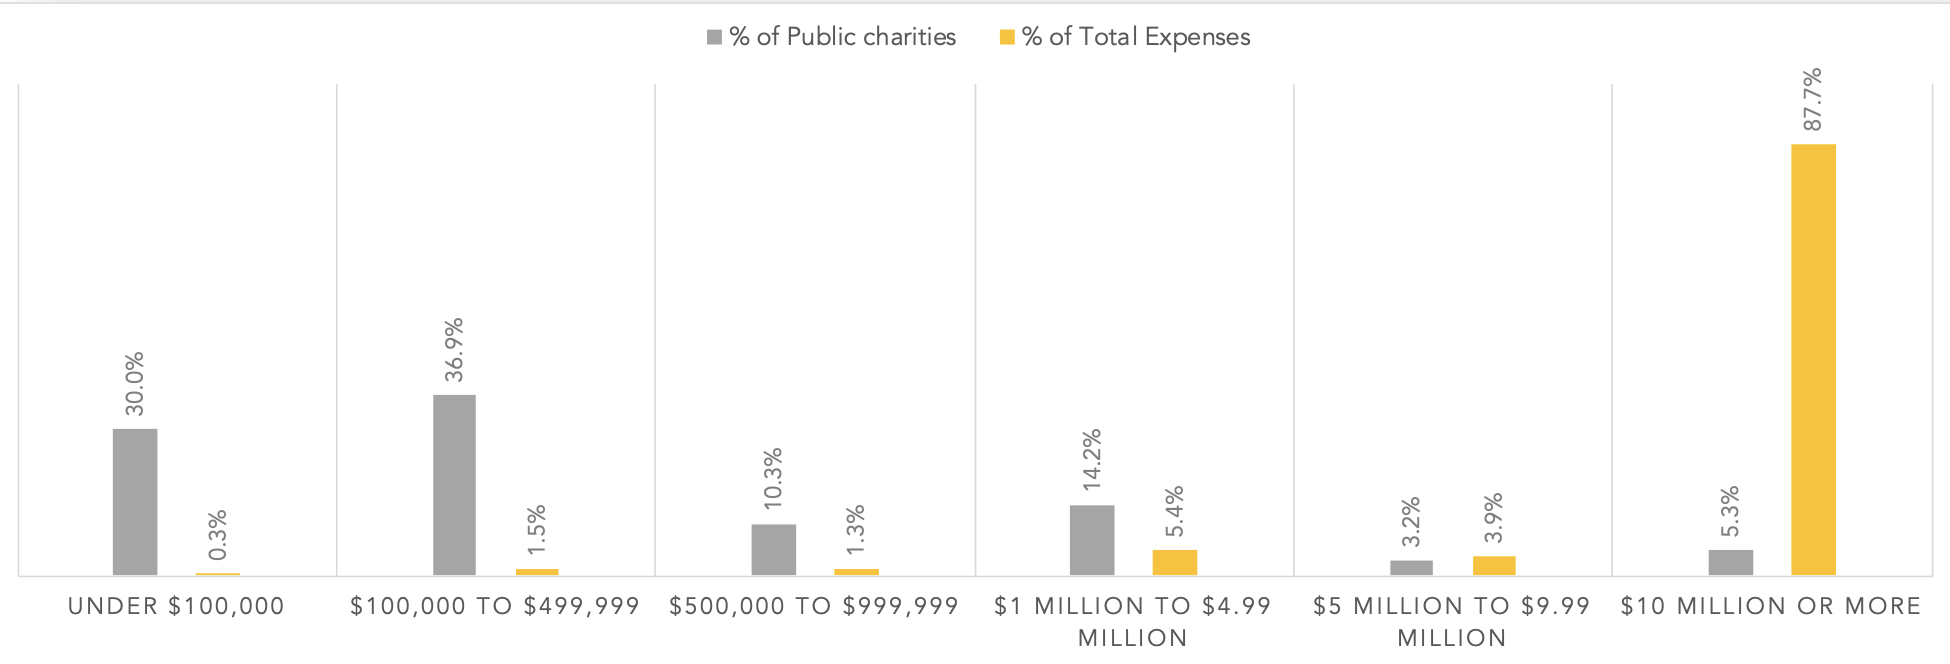 Bar graph depicting the number and expenses of public charities as a percentage of all public charities and expenses.